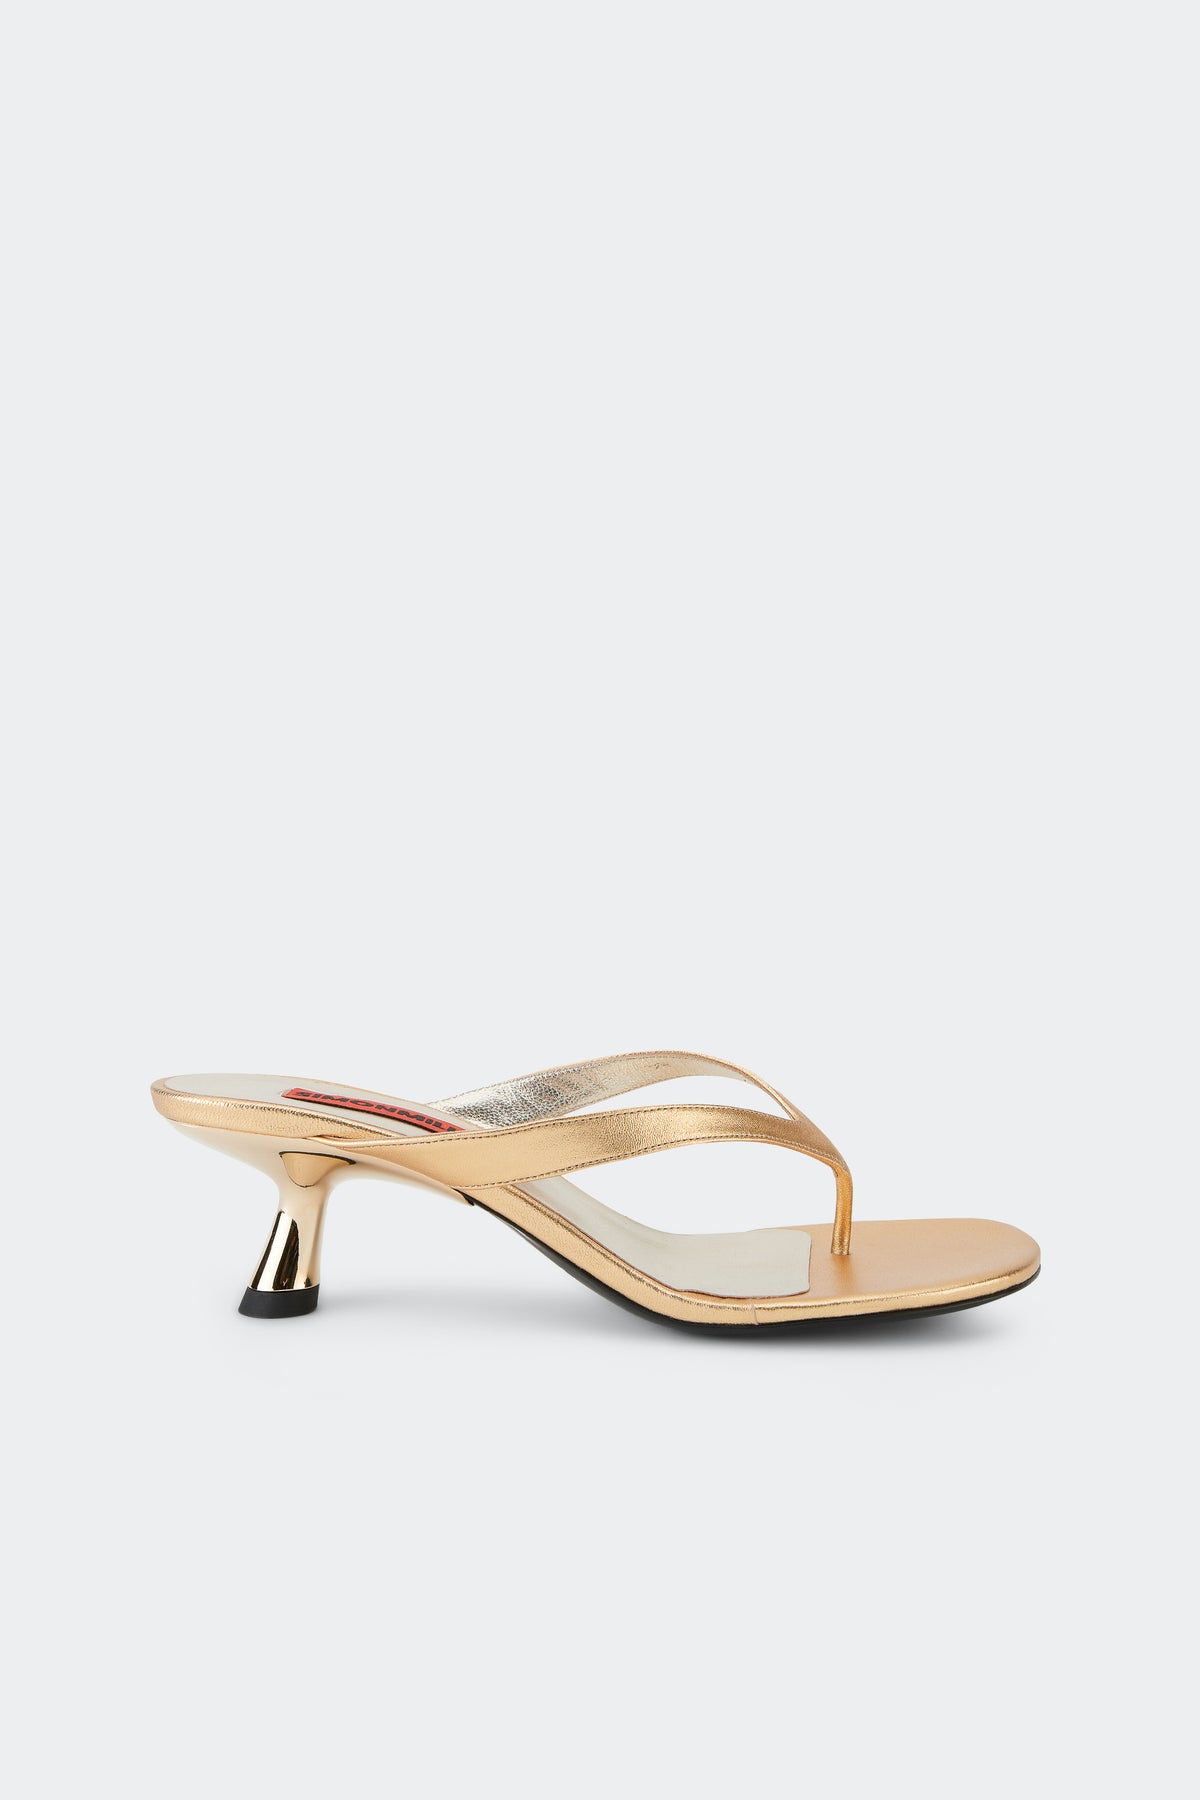 Beep Thong Sandal in Star Gold